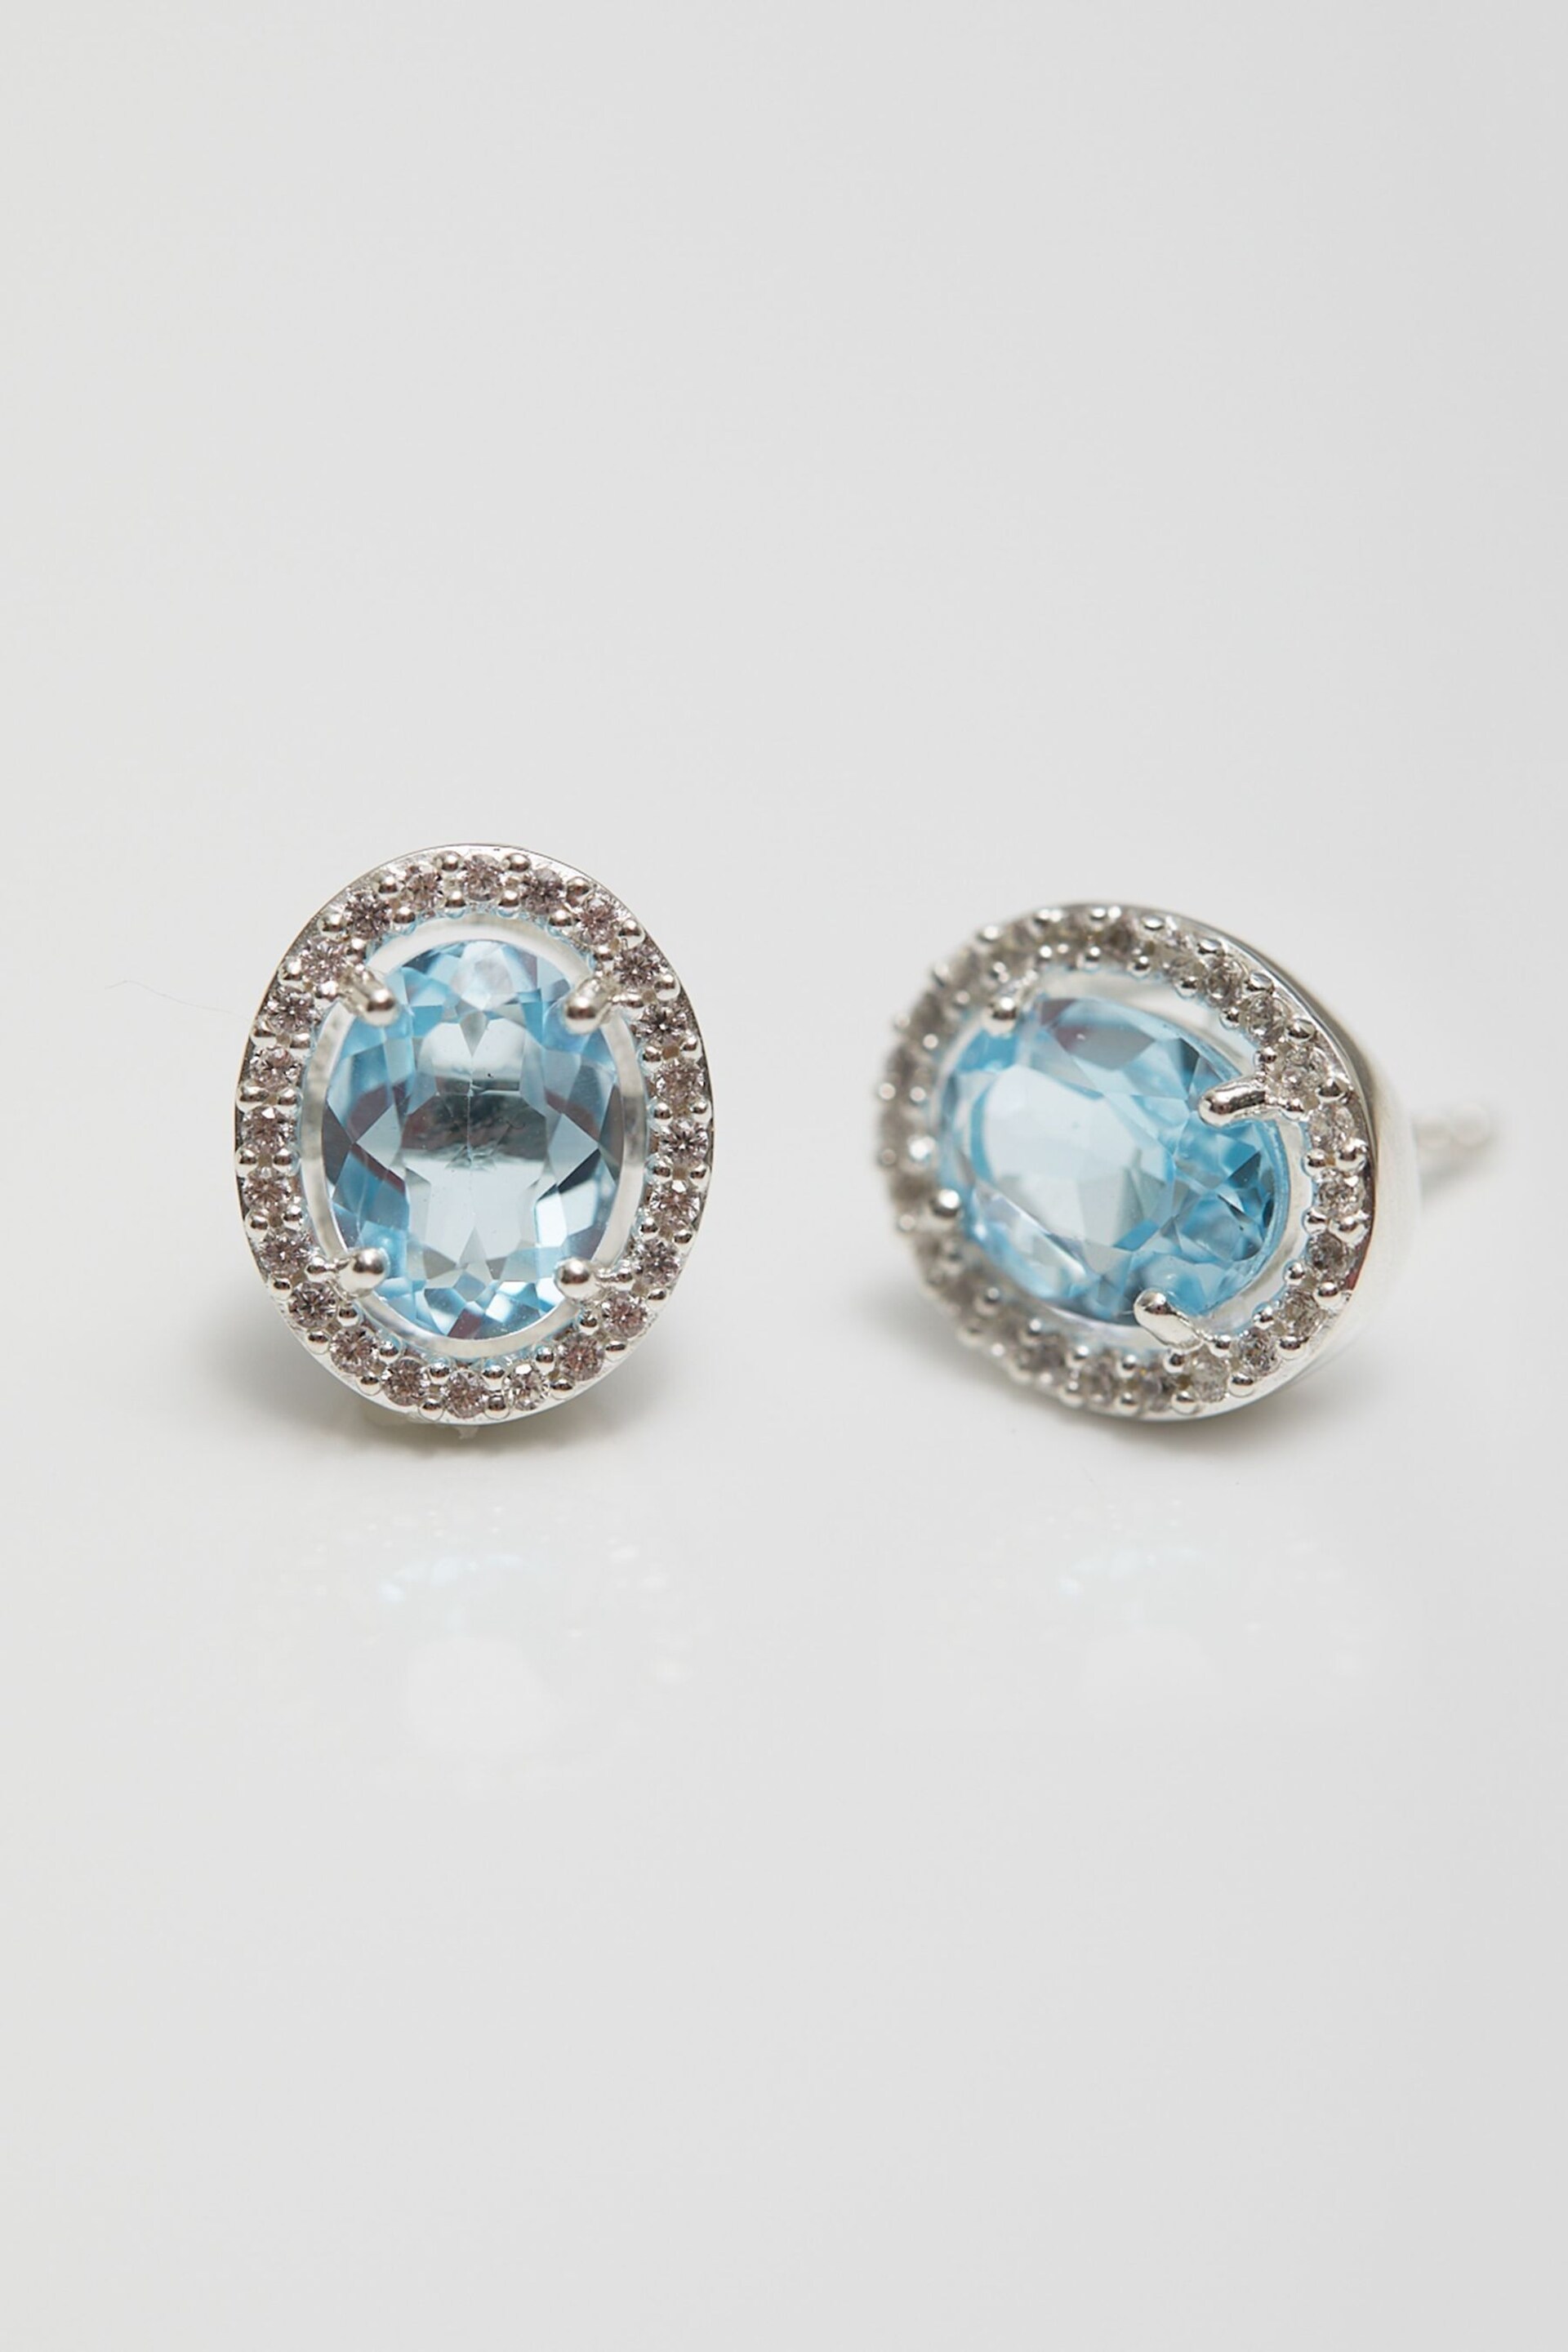 Simply Silver Silver Tone Topaz Halo Earrings - Image 2 of 4